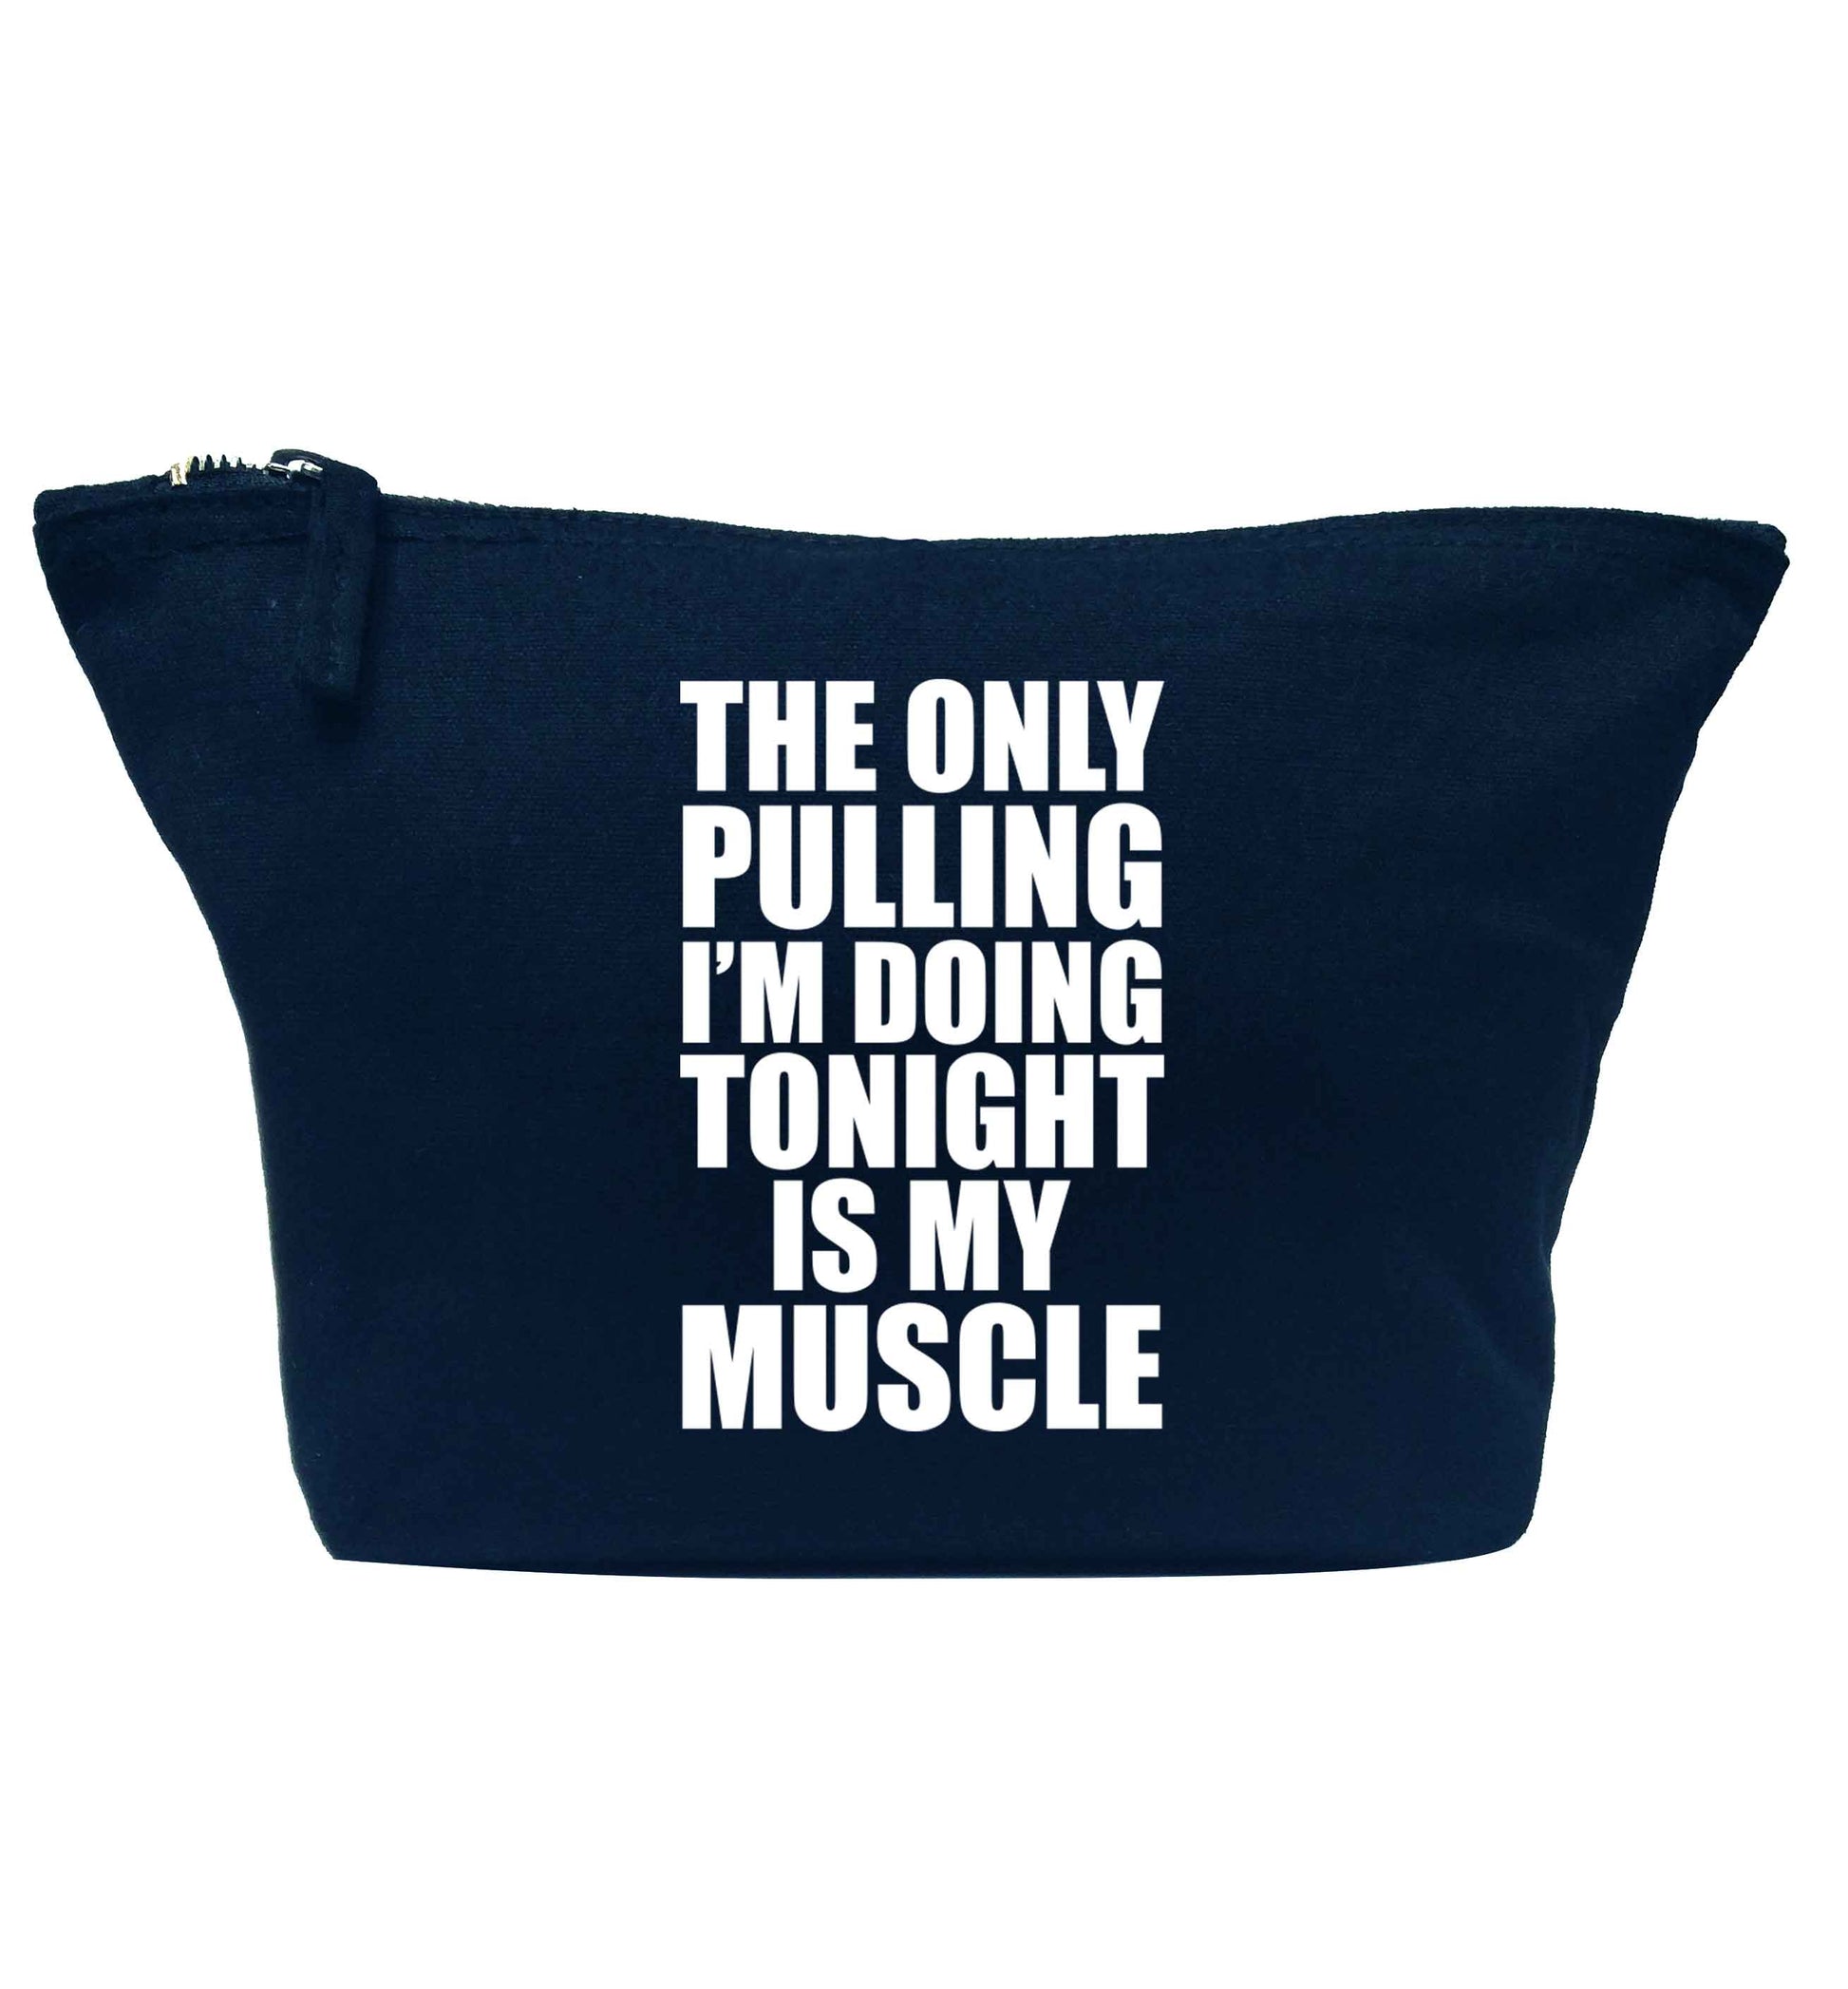 The only pulling I'm doing tonight is my muscle navy makeup bag